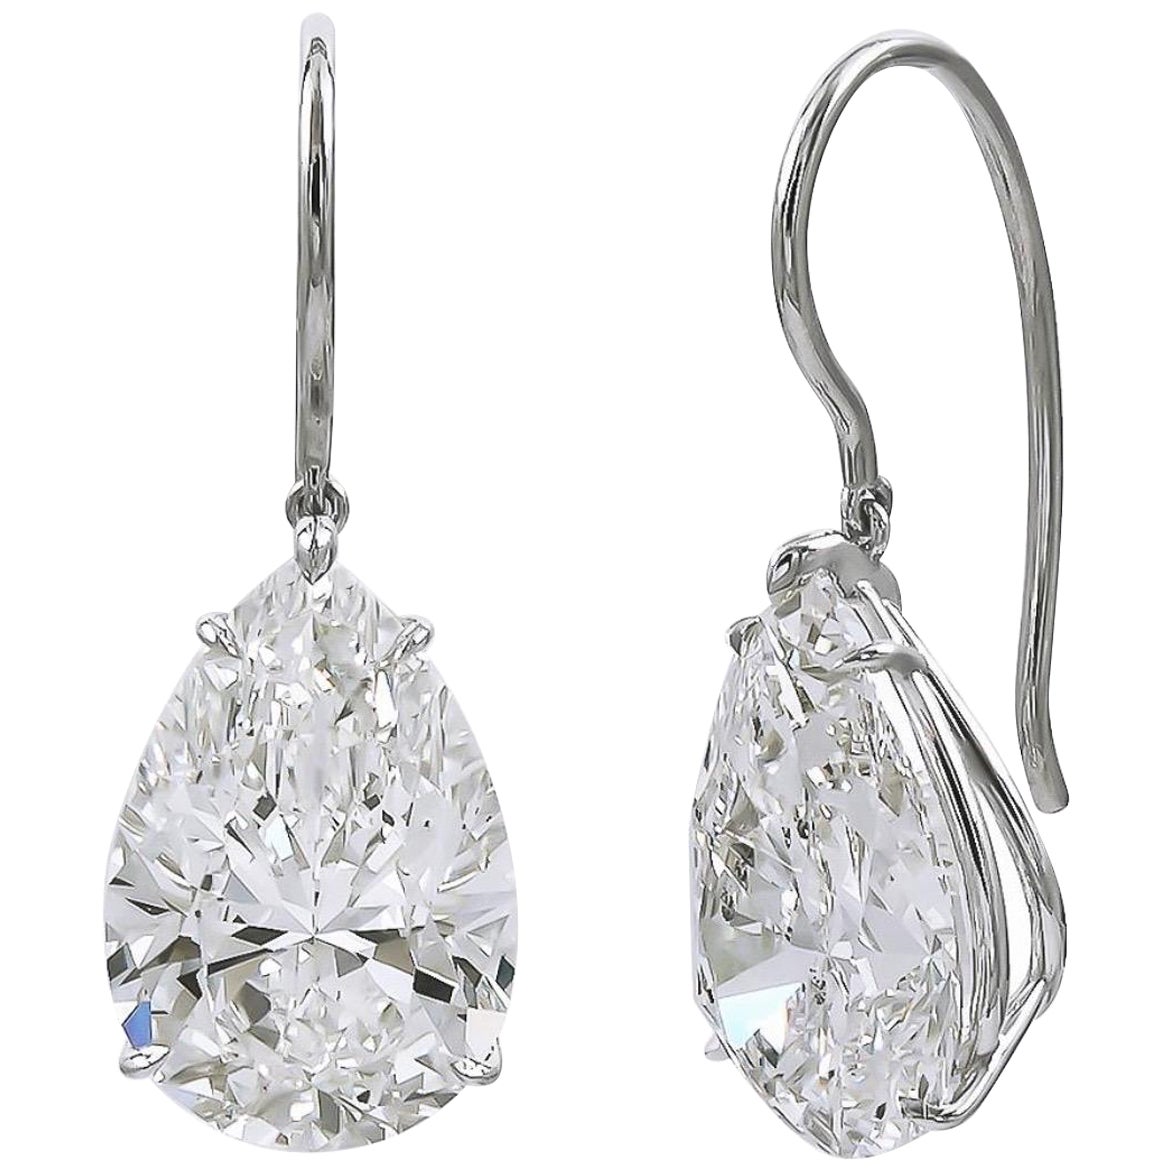 An Impressive and rare 10.33 Carat toatal weight matched pear shaped Drop earrings by ISSAC NUSSBAUM NEW YORK.
This beautiful pair of earrings feature rare pear shape diamonds set in hand made platinum. the perfectly cut diamonds weigh over 5 carats